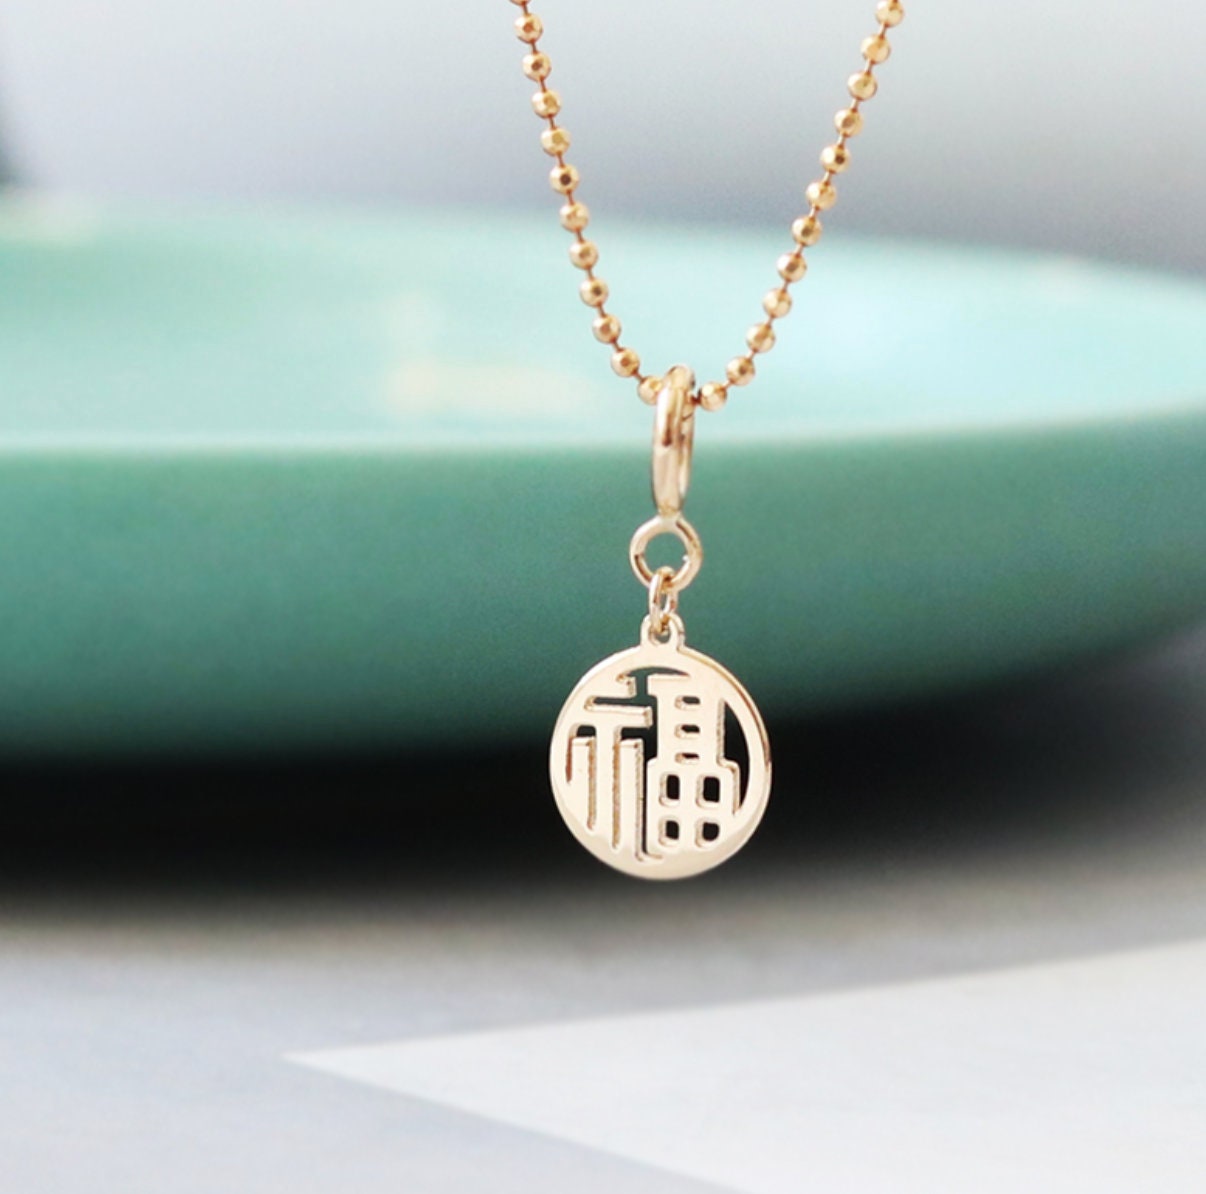 Buy Gold Chinese Pendant Online In India - Etsy India